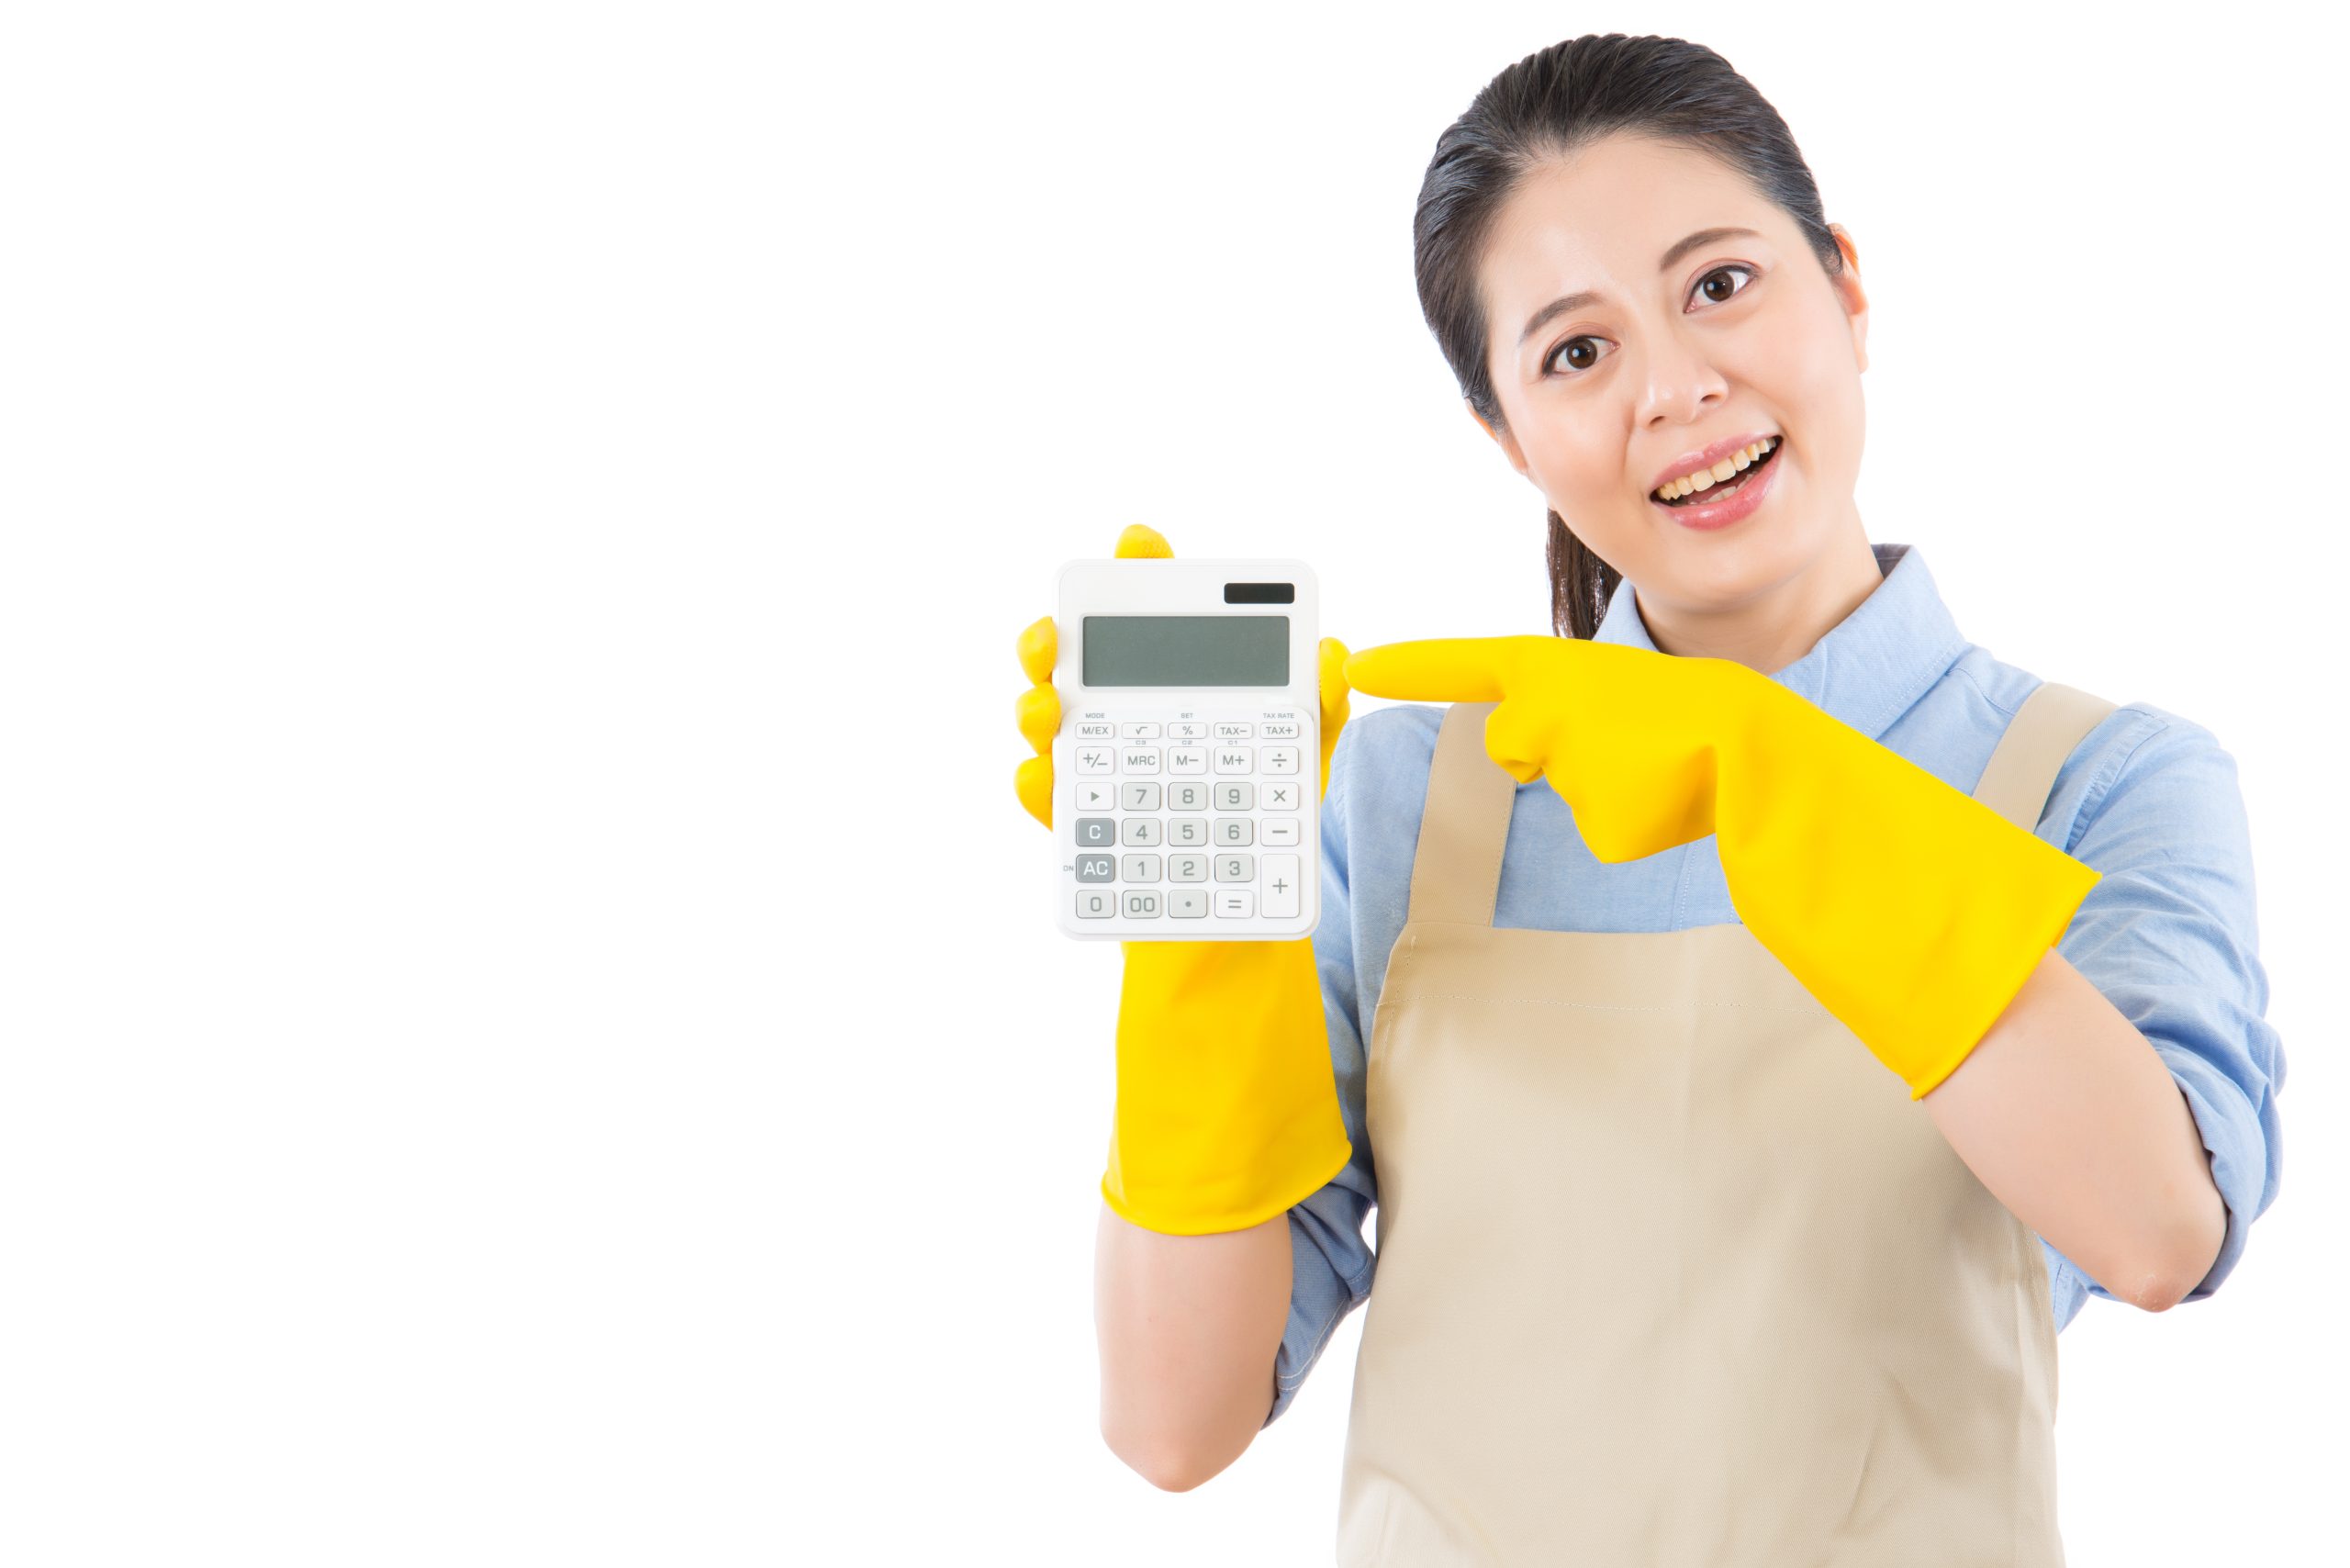 How much does a commercial clean cost?